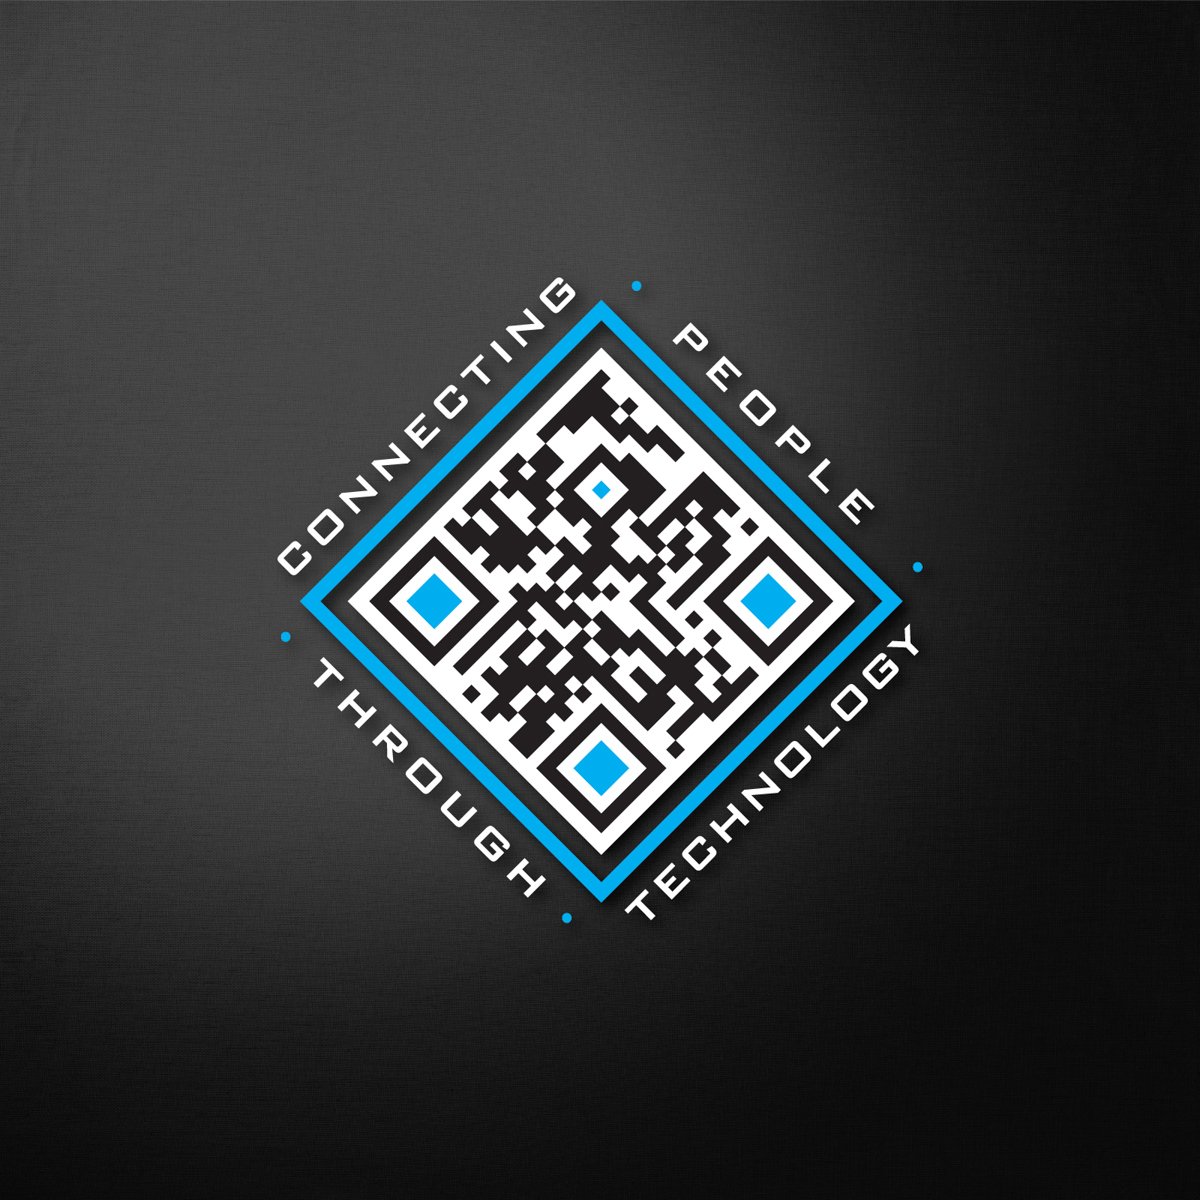 QR code design and creation.